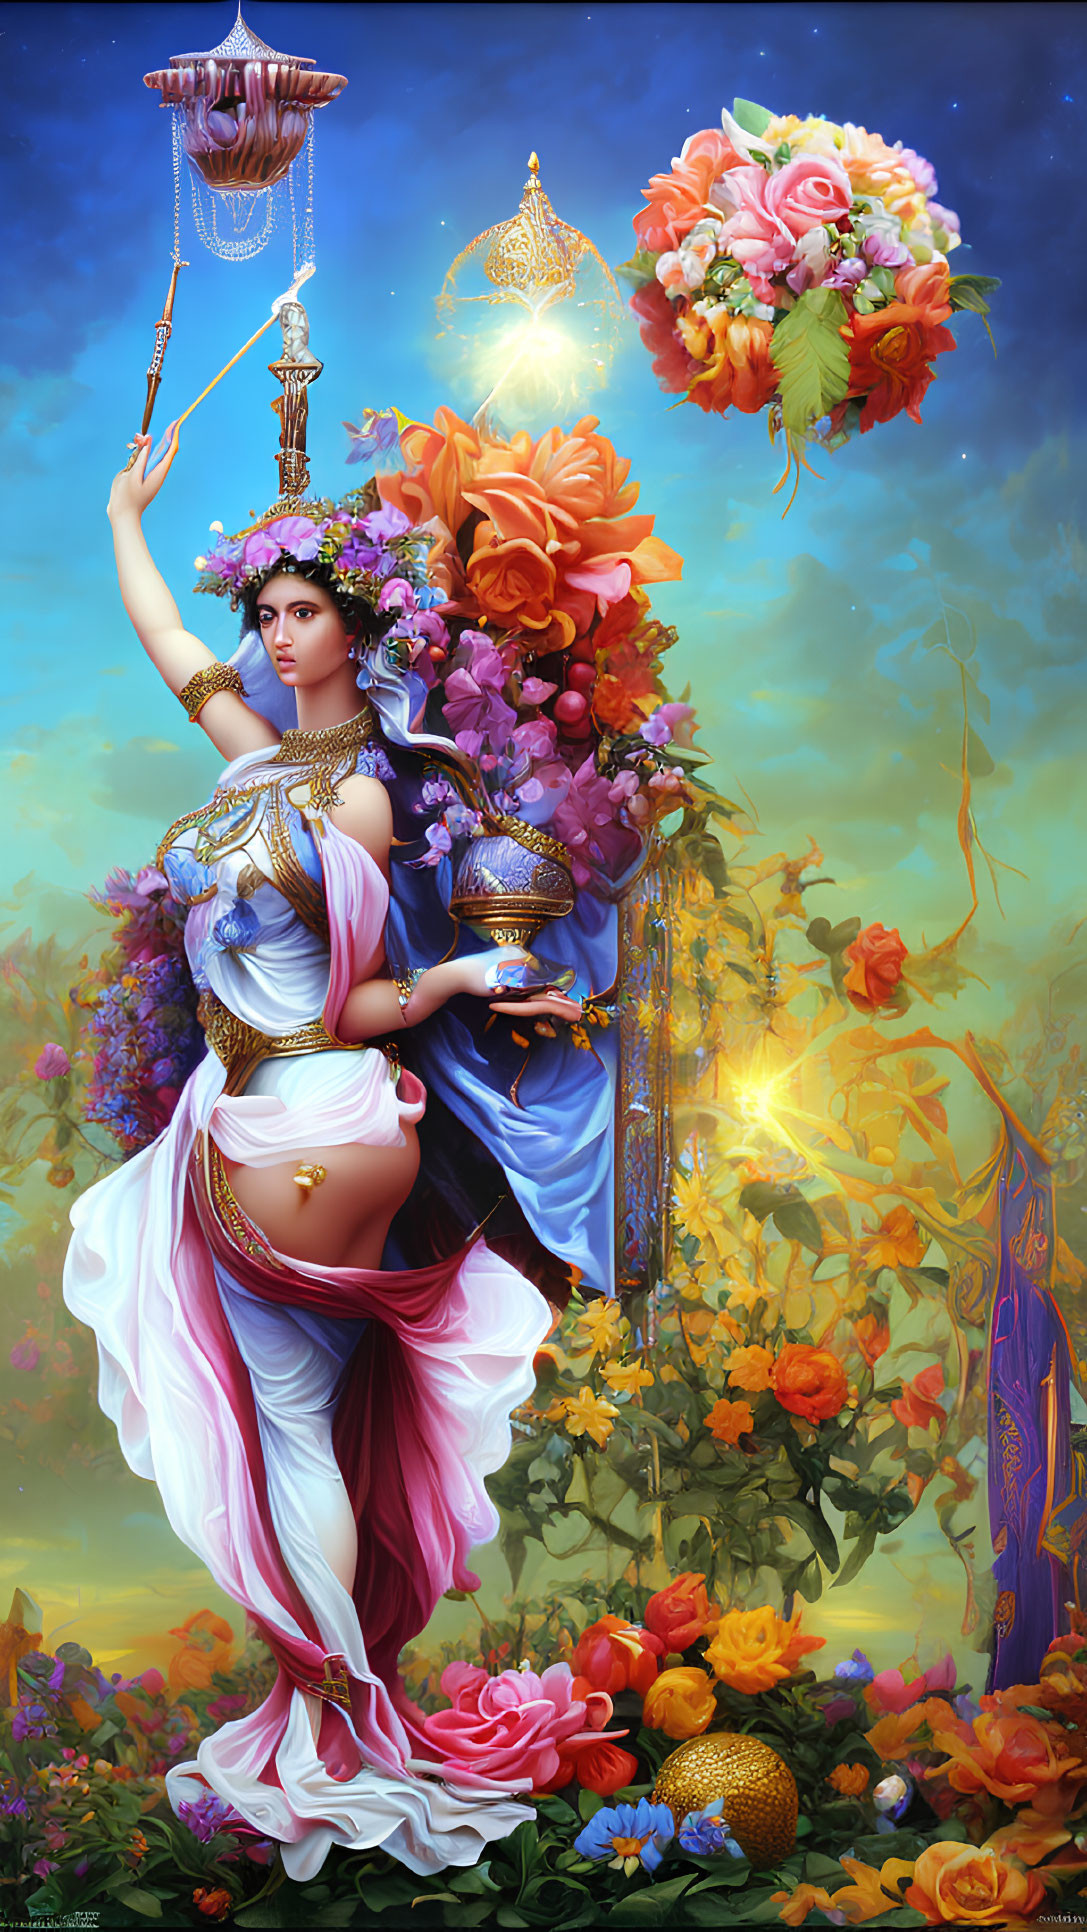 Colorful painting of woman with flowers and jewelry in lush garden setting